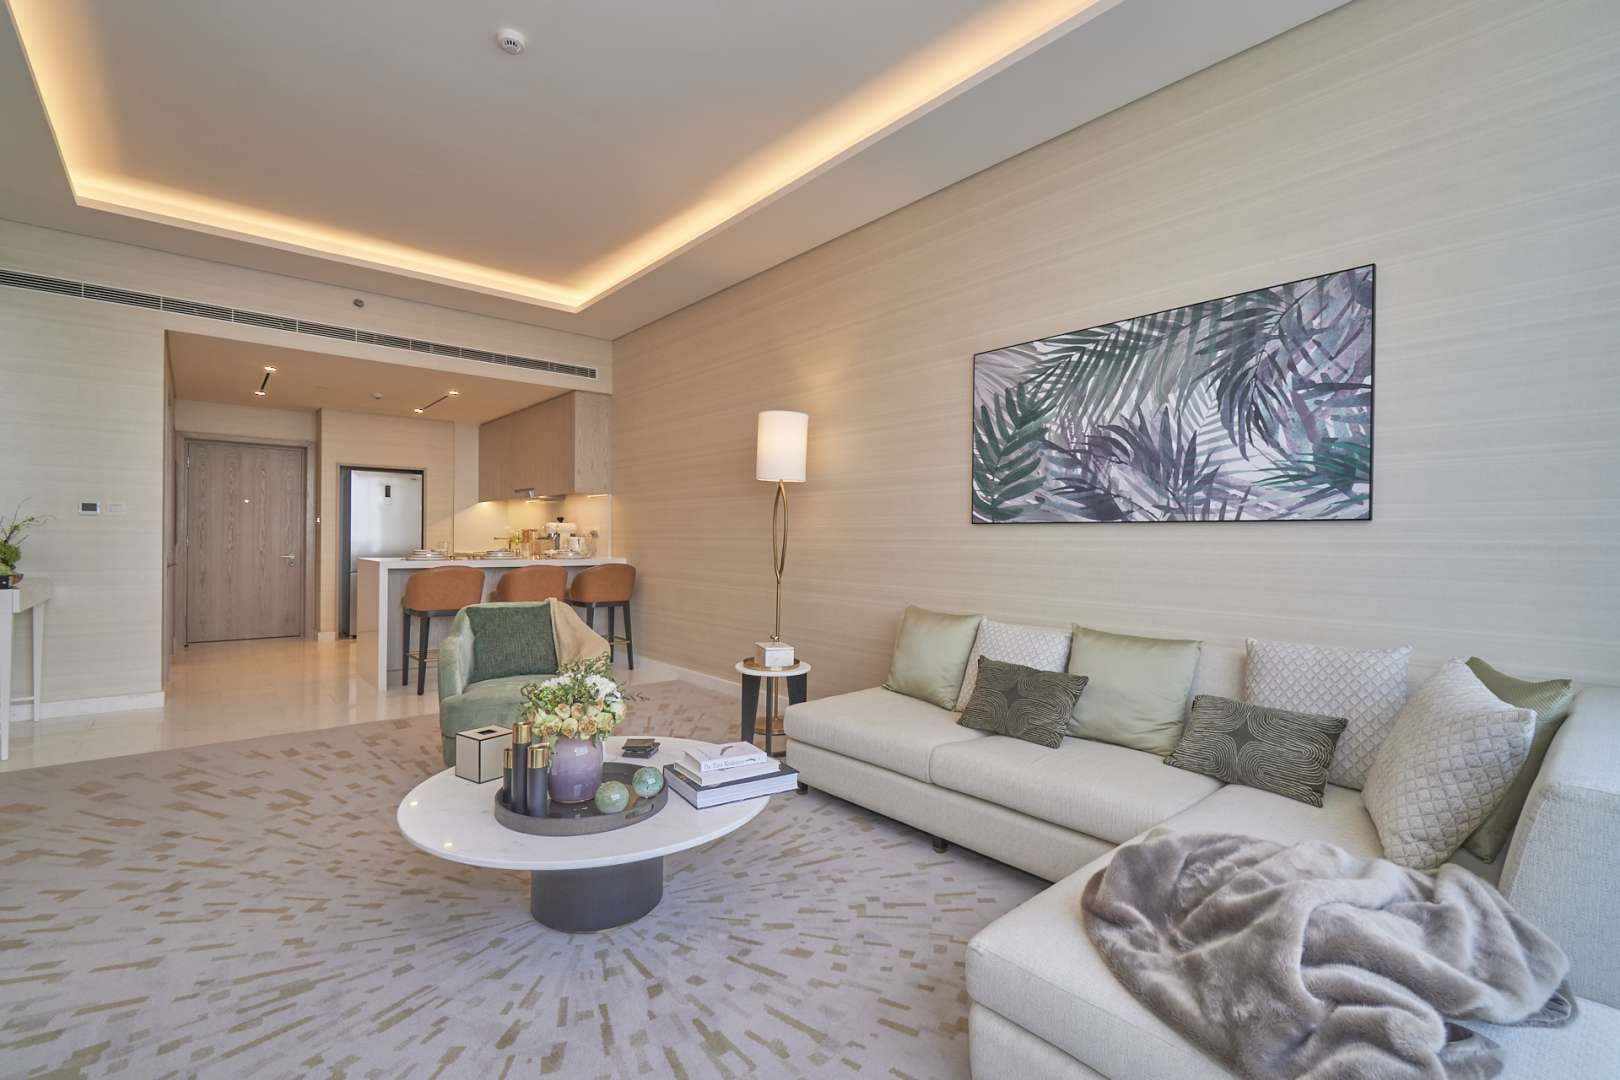 1 Bedroom Apartment For Sale The Palm Tower Lp07385 2d8b26feaf594400.jpg